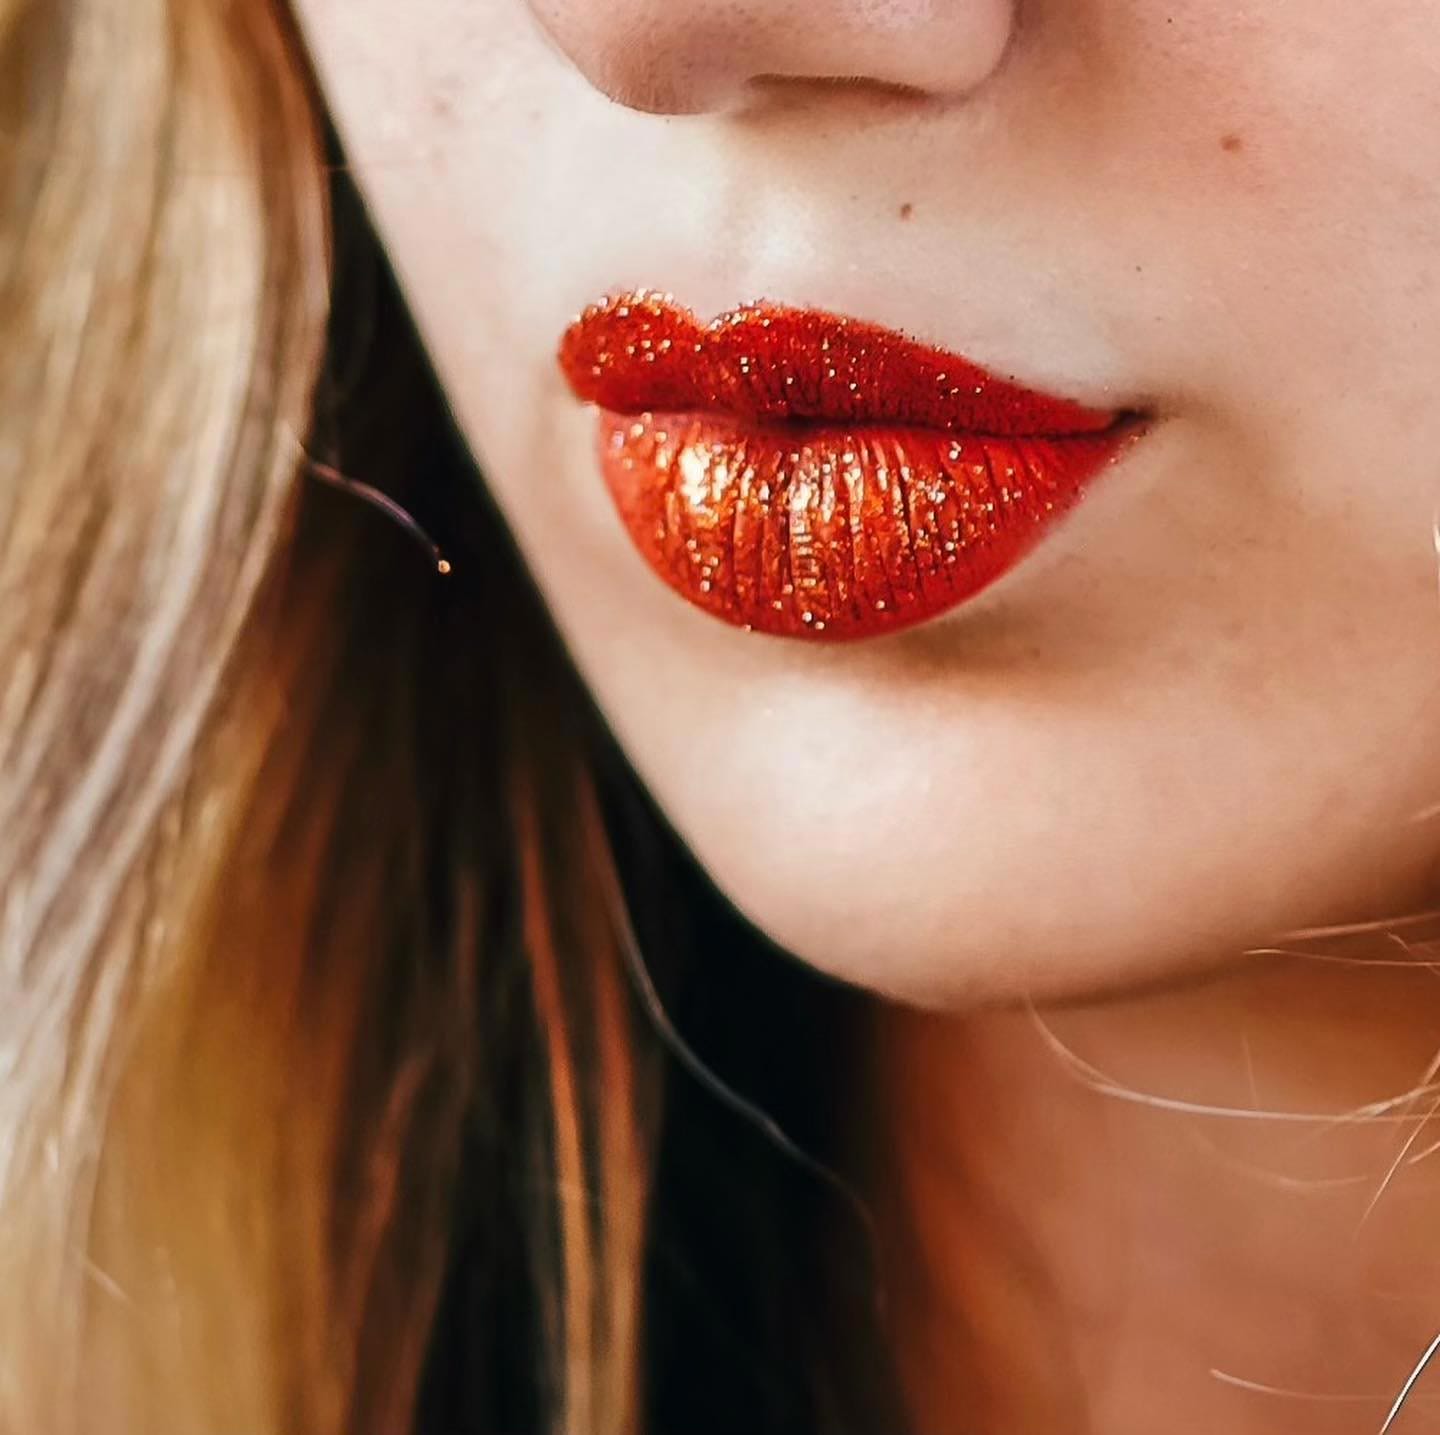 Close-up of a person with glittery red lipstick.